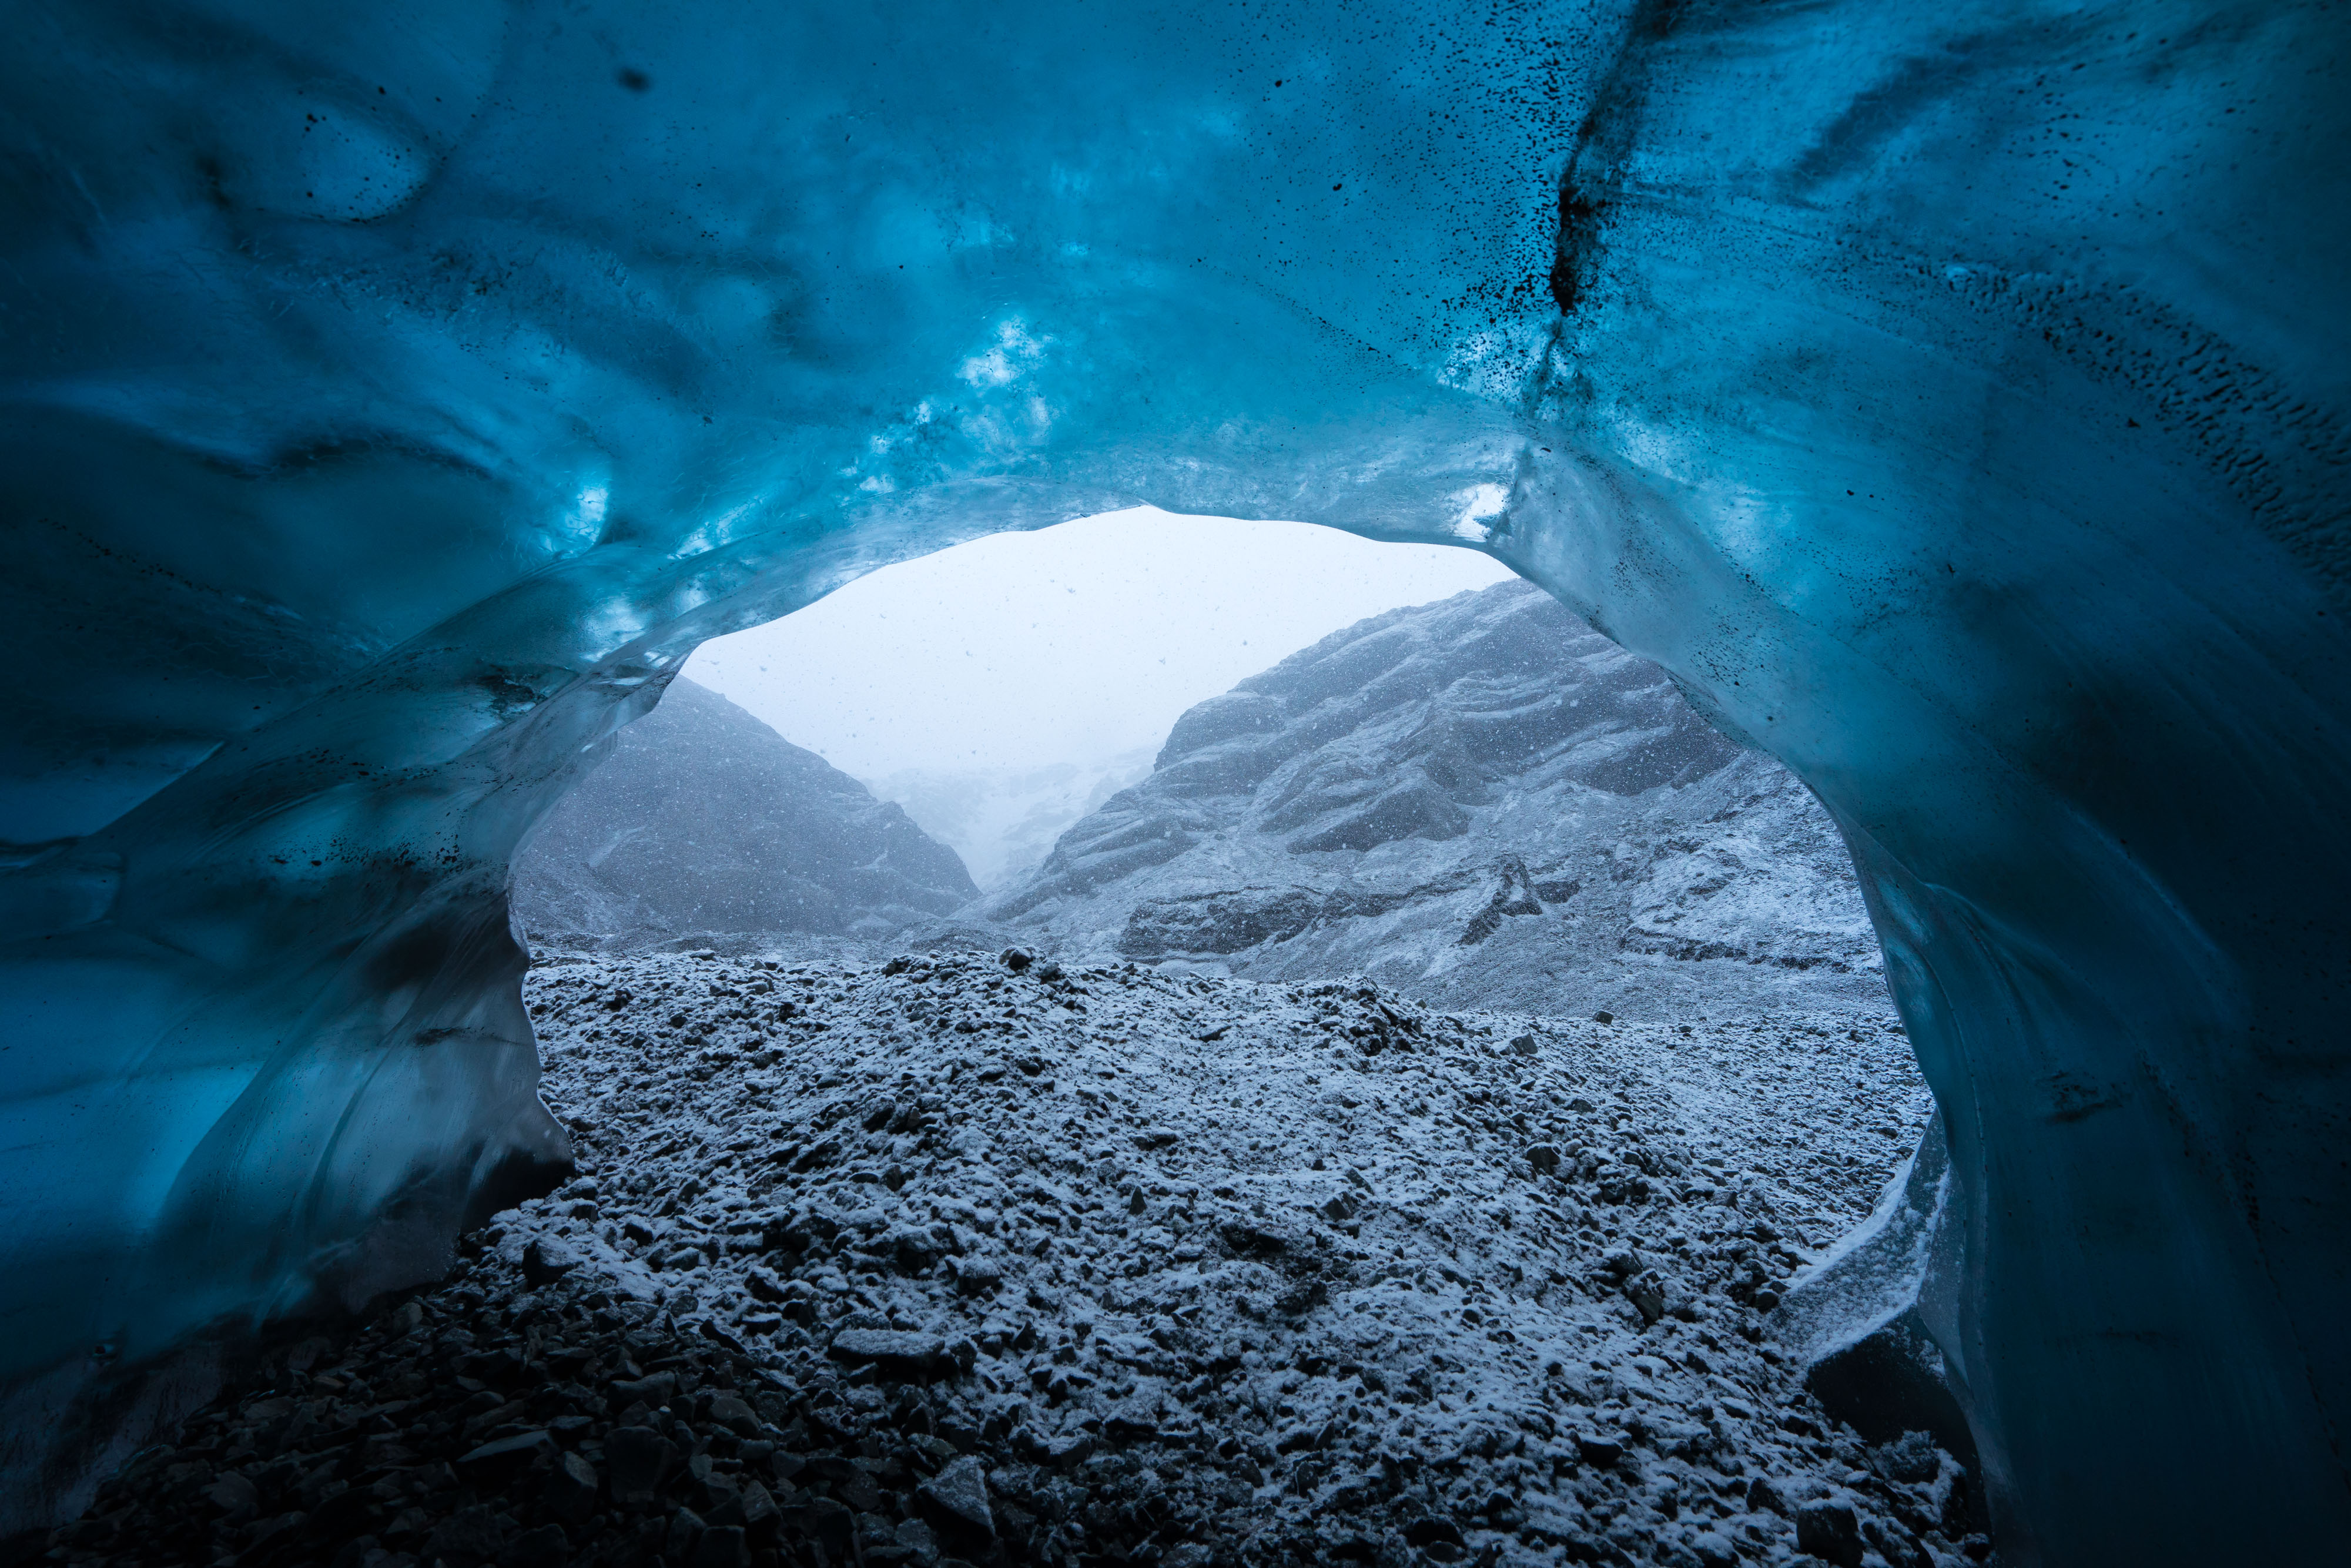 A7RII shoots in Iceland's glacier caves | Photoclubalpha